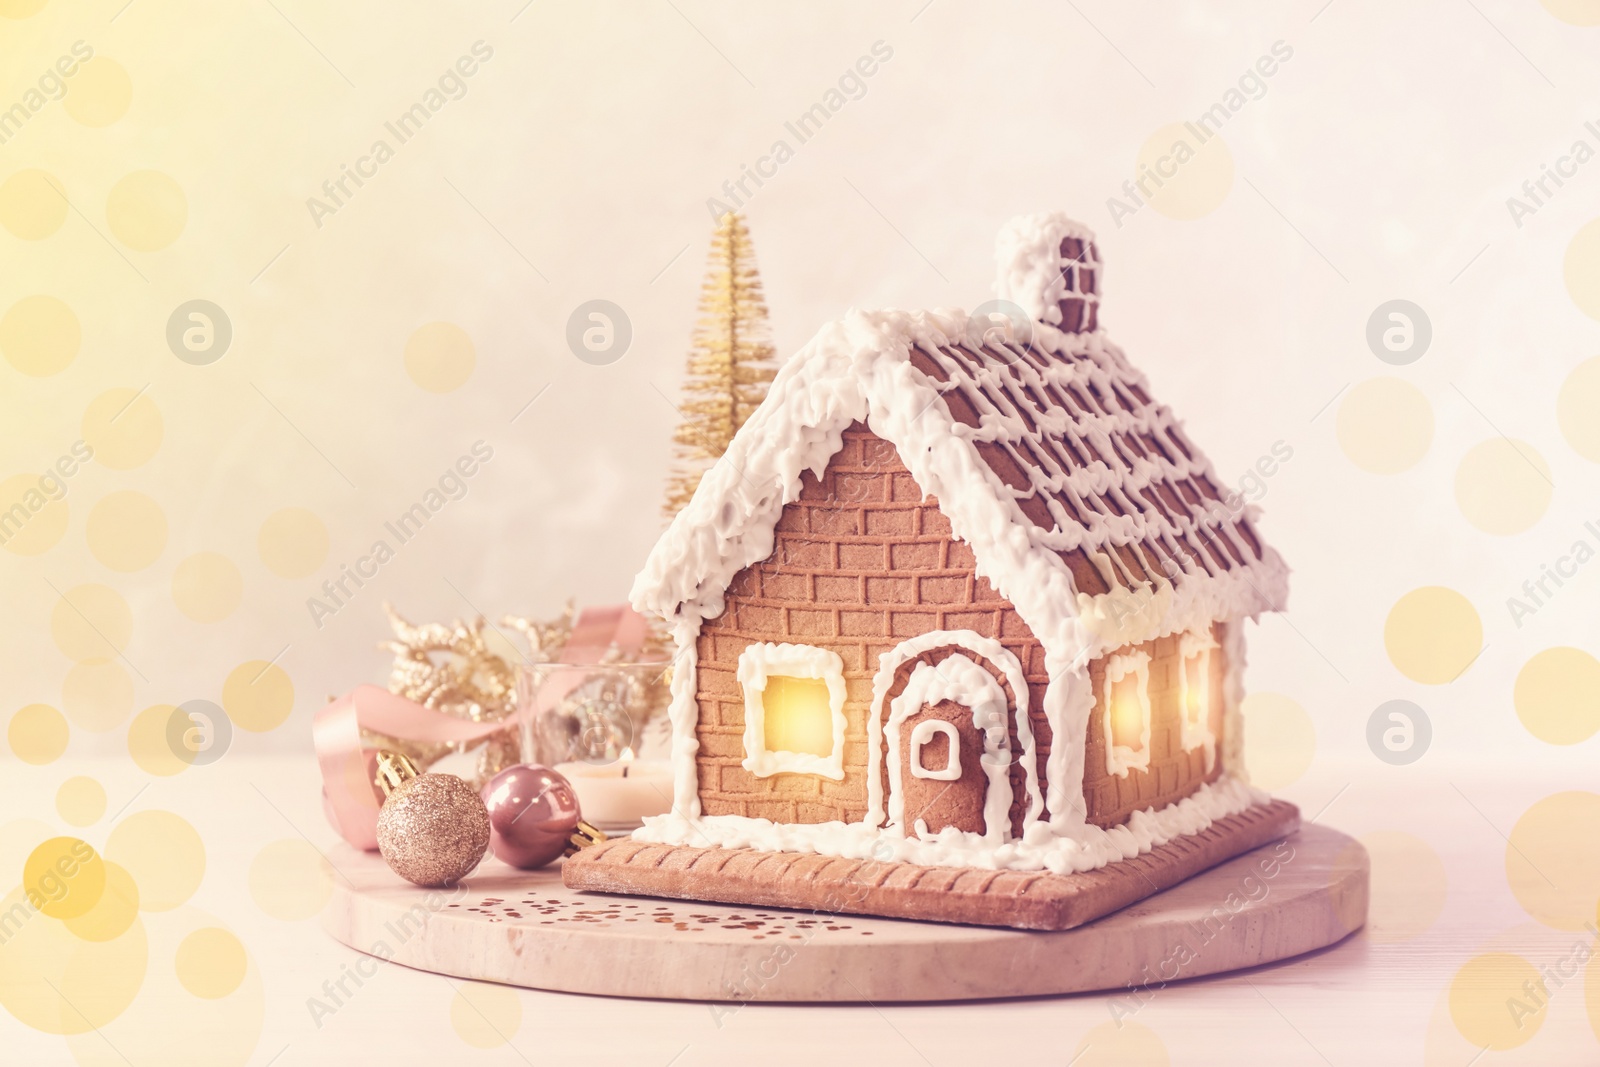 Image of Beautiful gingerbread house decorated with icing and Christmas baubles on table